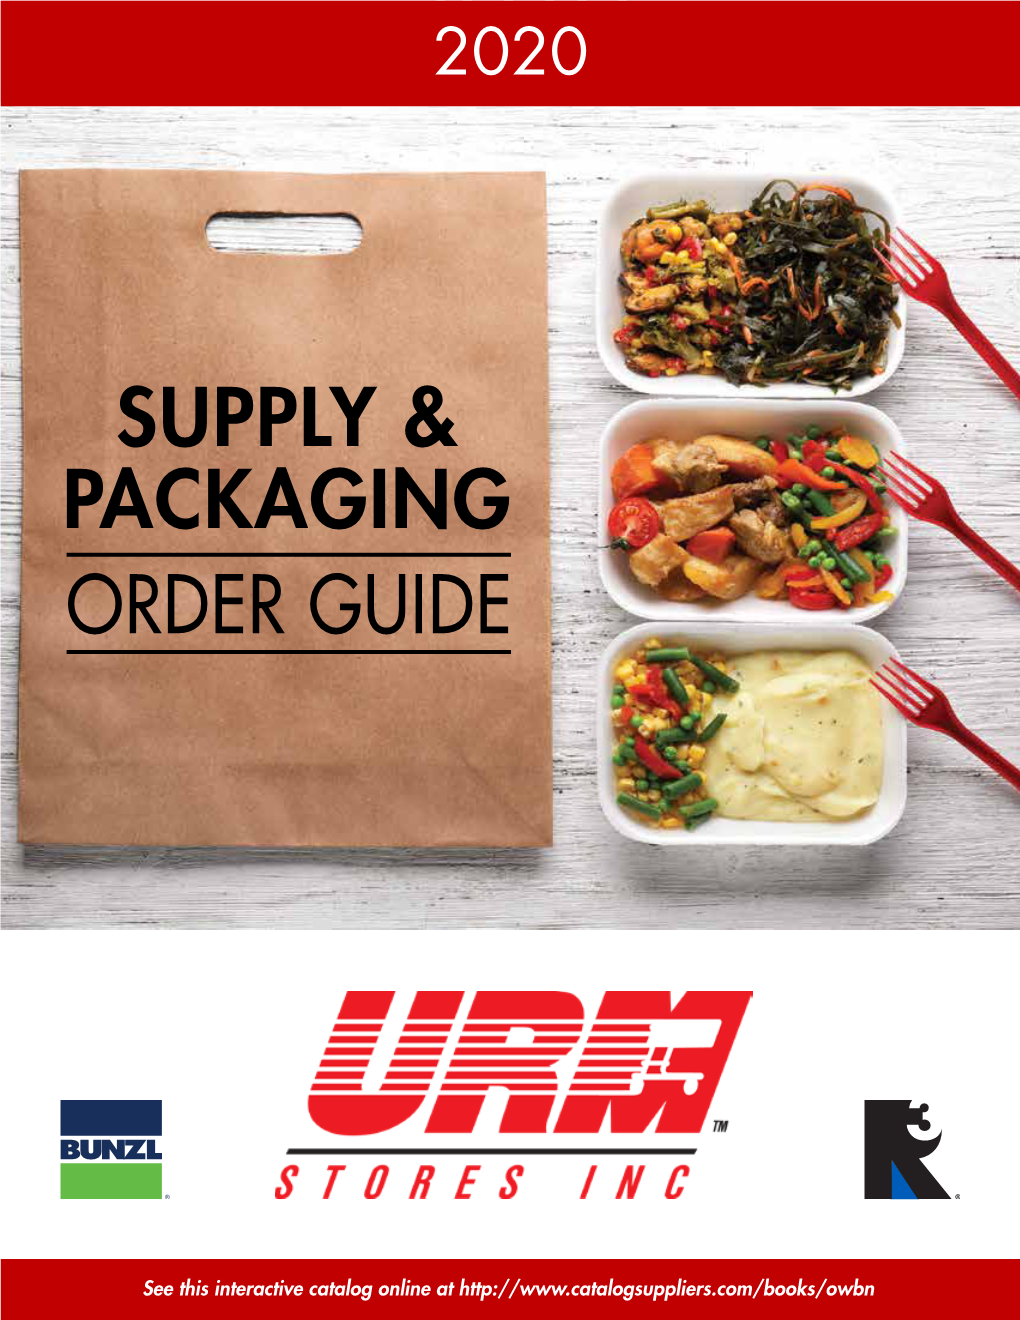 Supply & Packaging Order Guide